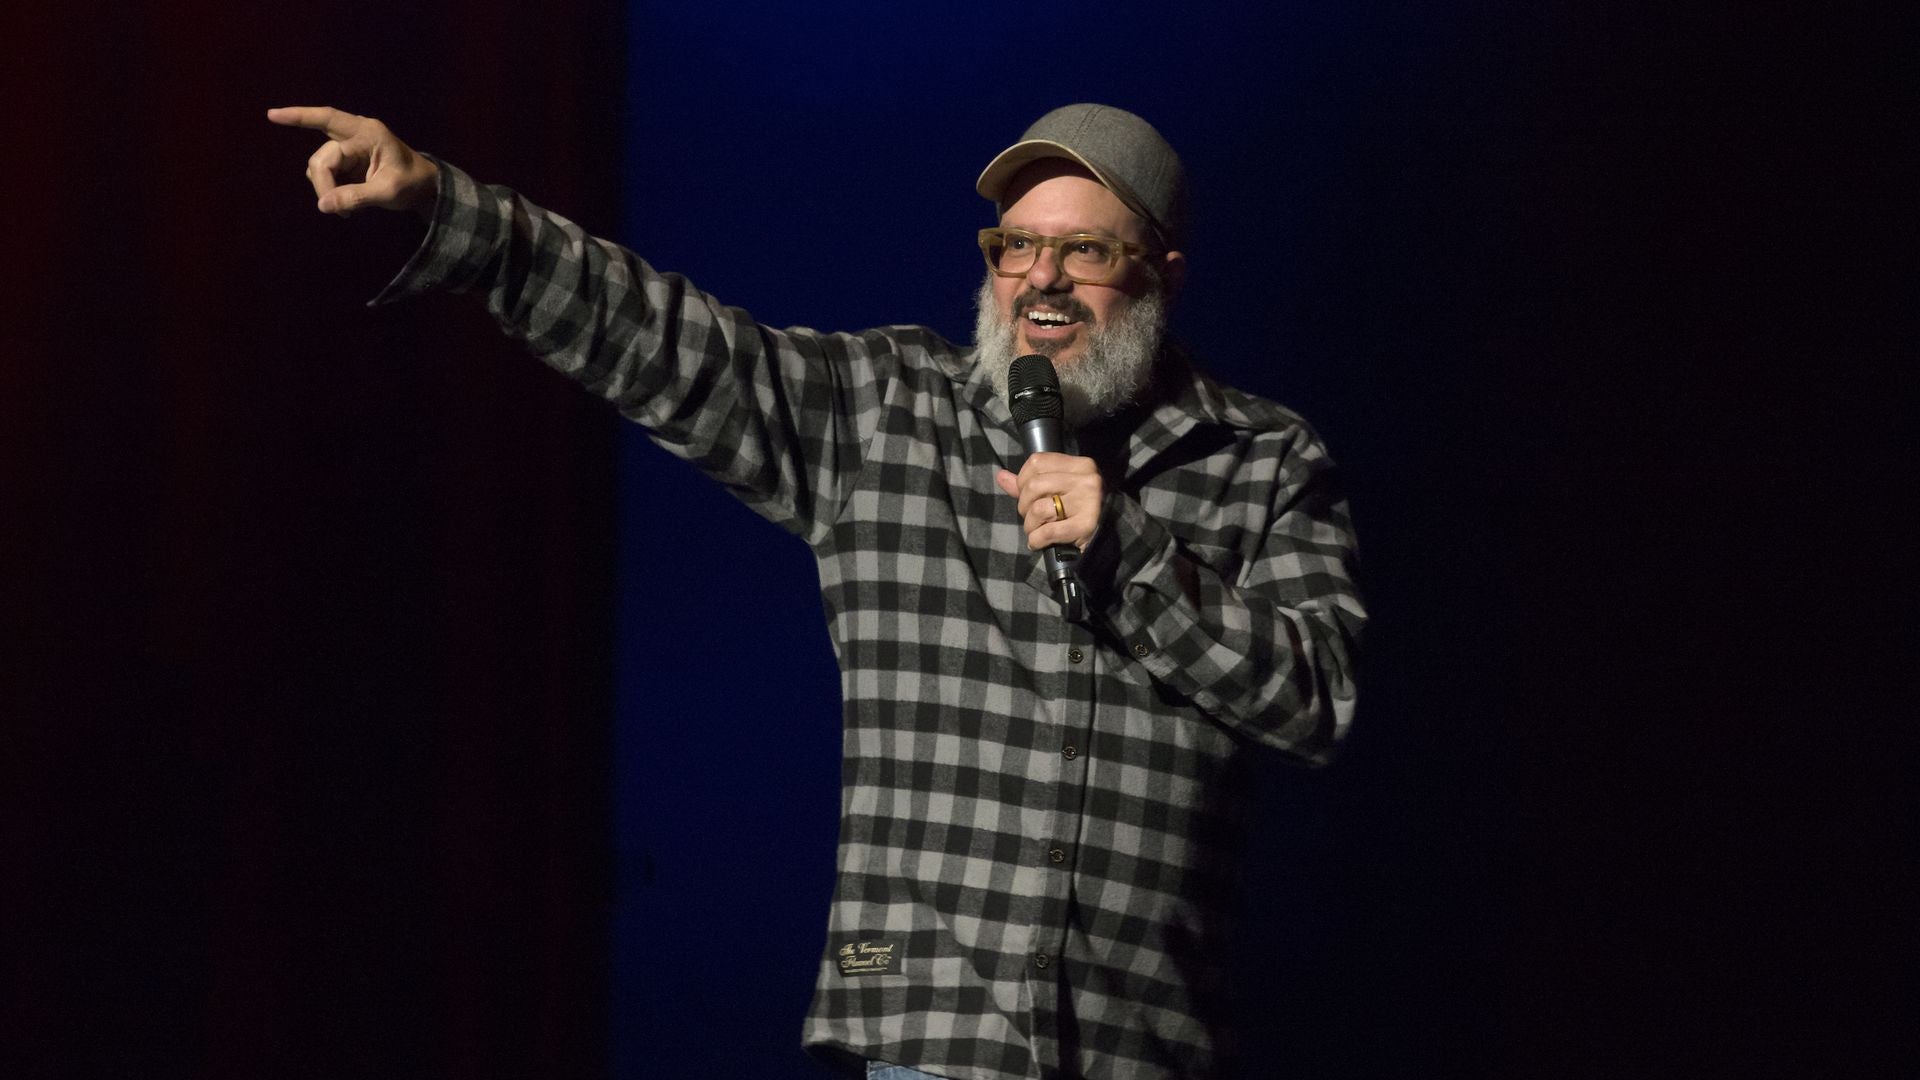 David Cross on why his comedy tour pissed off people right and left (A.V. Club)